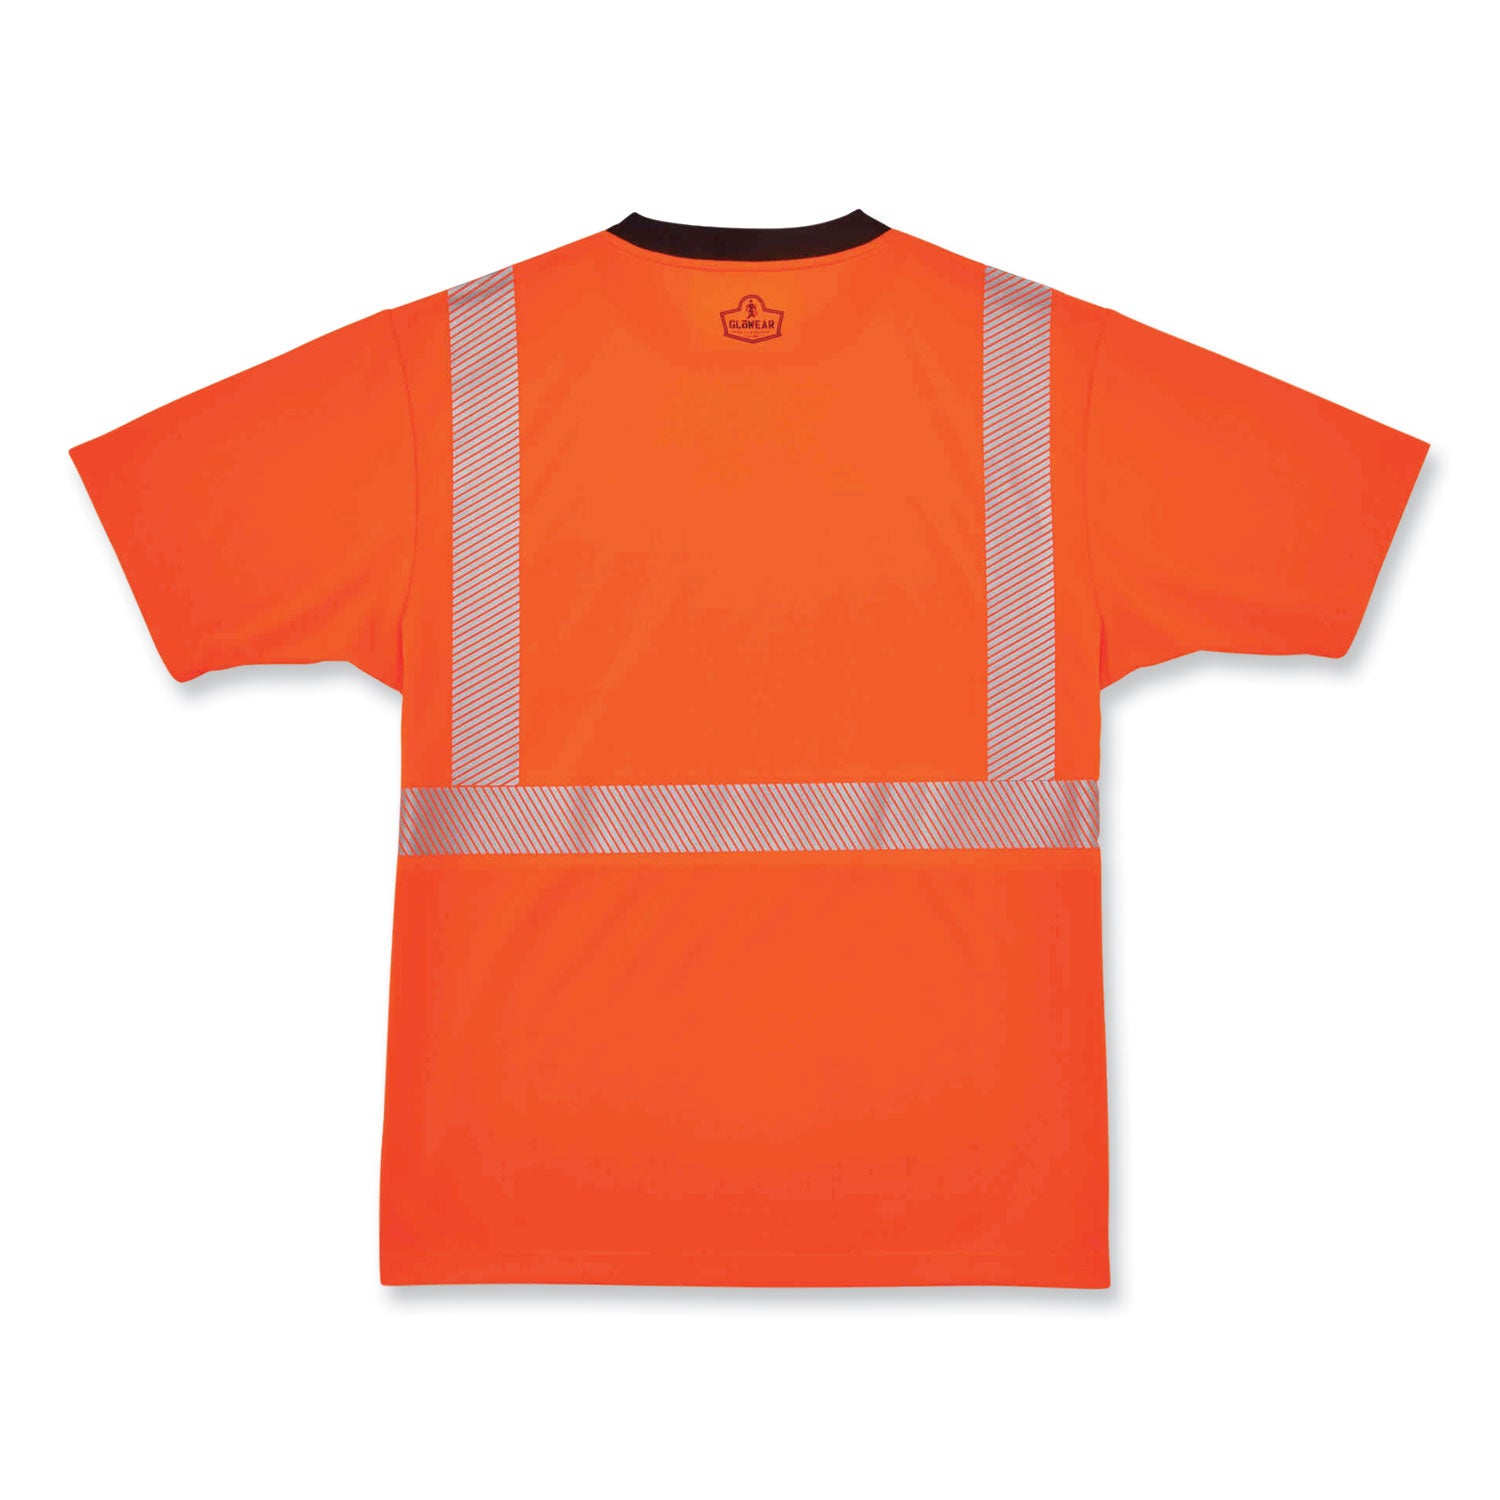 glowear-8280bk-class-2-performance-t-shirt-with-black-bottom-polyester-large-orange-ships-in-1-3-business-days_ego22584 - 3